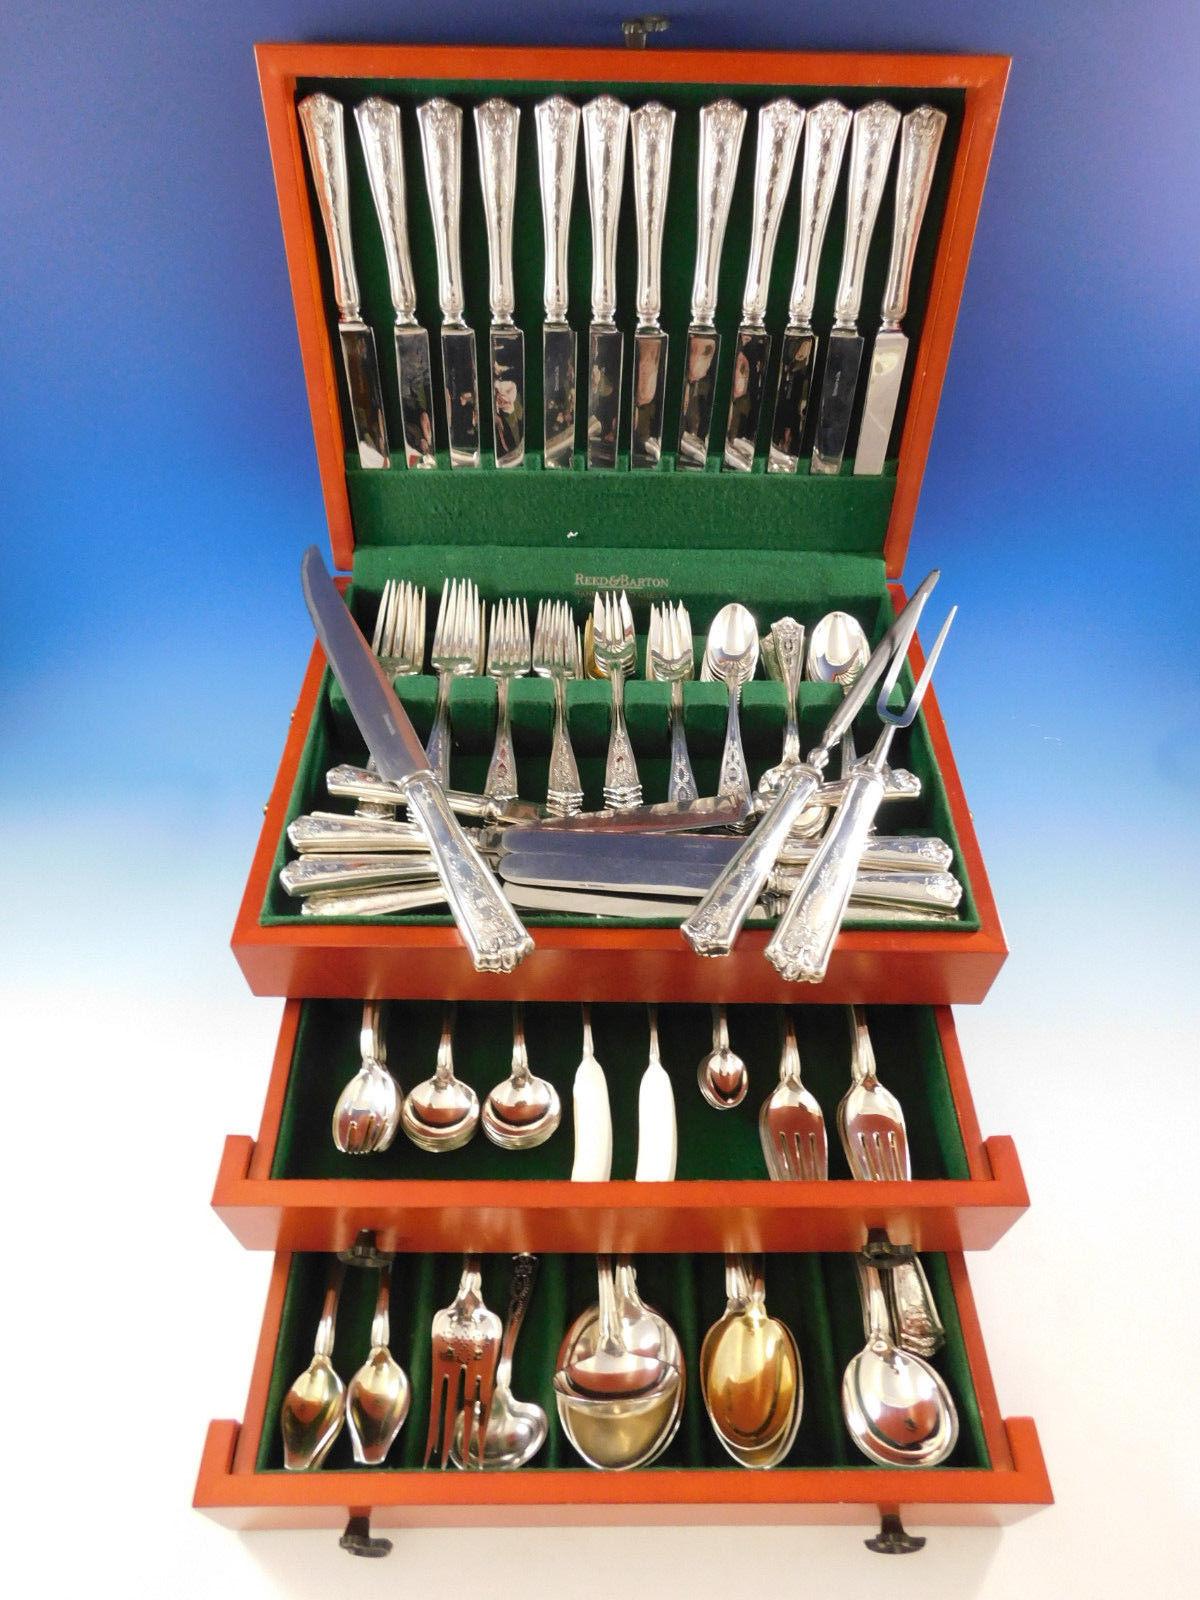 Monumental Winthrop by Tiffany & Co. Sterling Silver Flatware set - 193 pieces. This set includes: 

12 dinner knives, 10 1/4